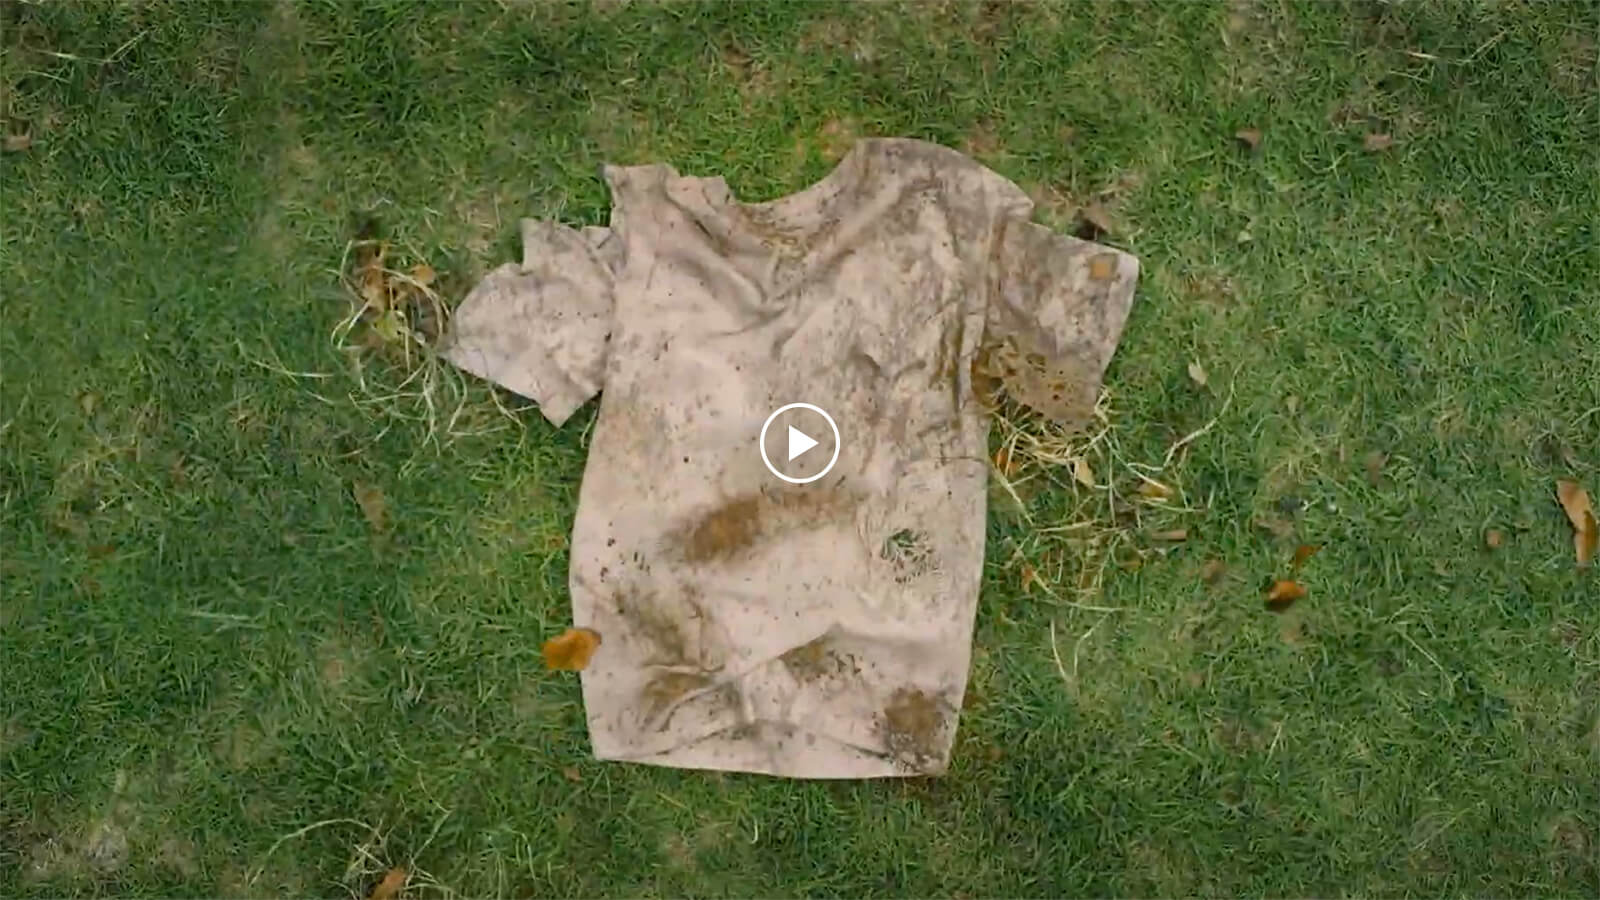 Thumbnail image of the video that dirty and deformed t-shirt is on the ground.